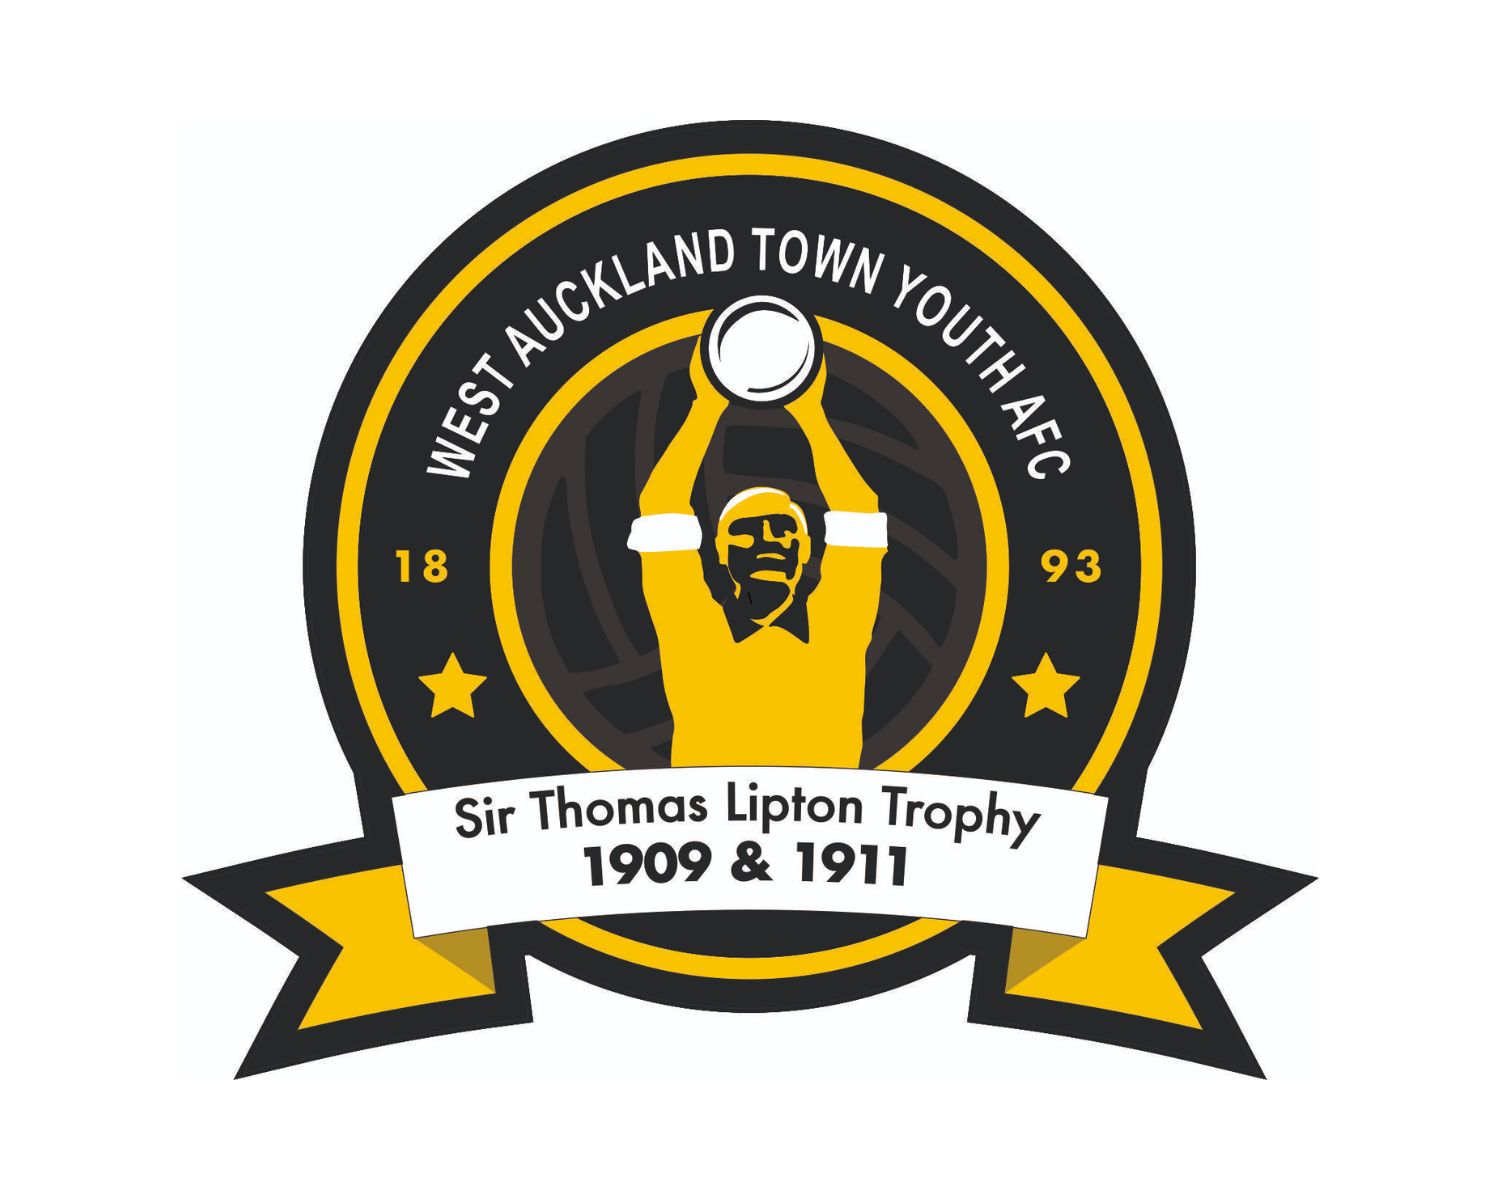 west-auckland-town-fc-11-football-club-facts